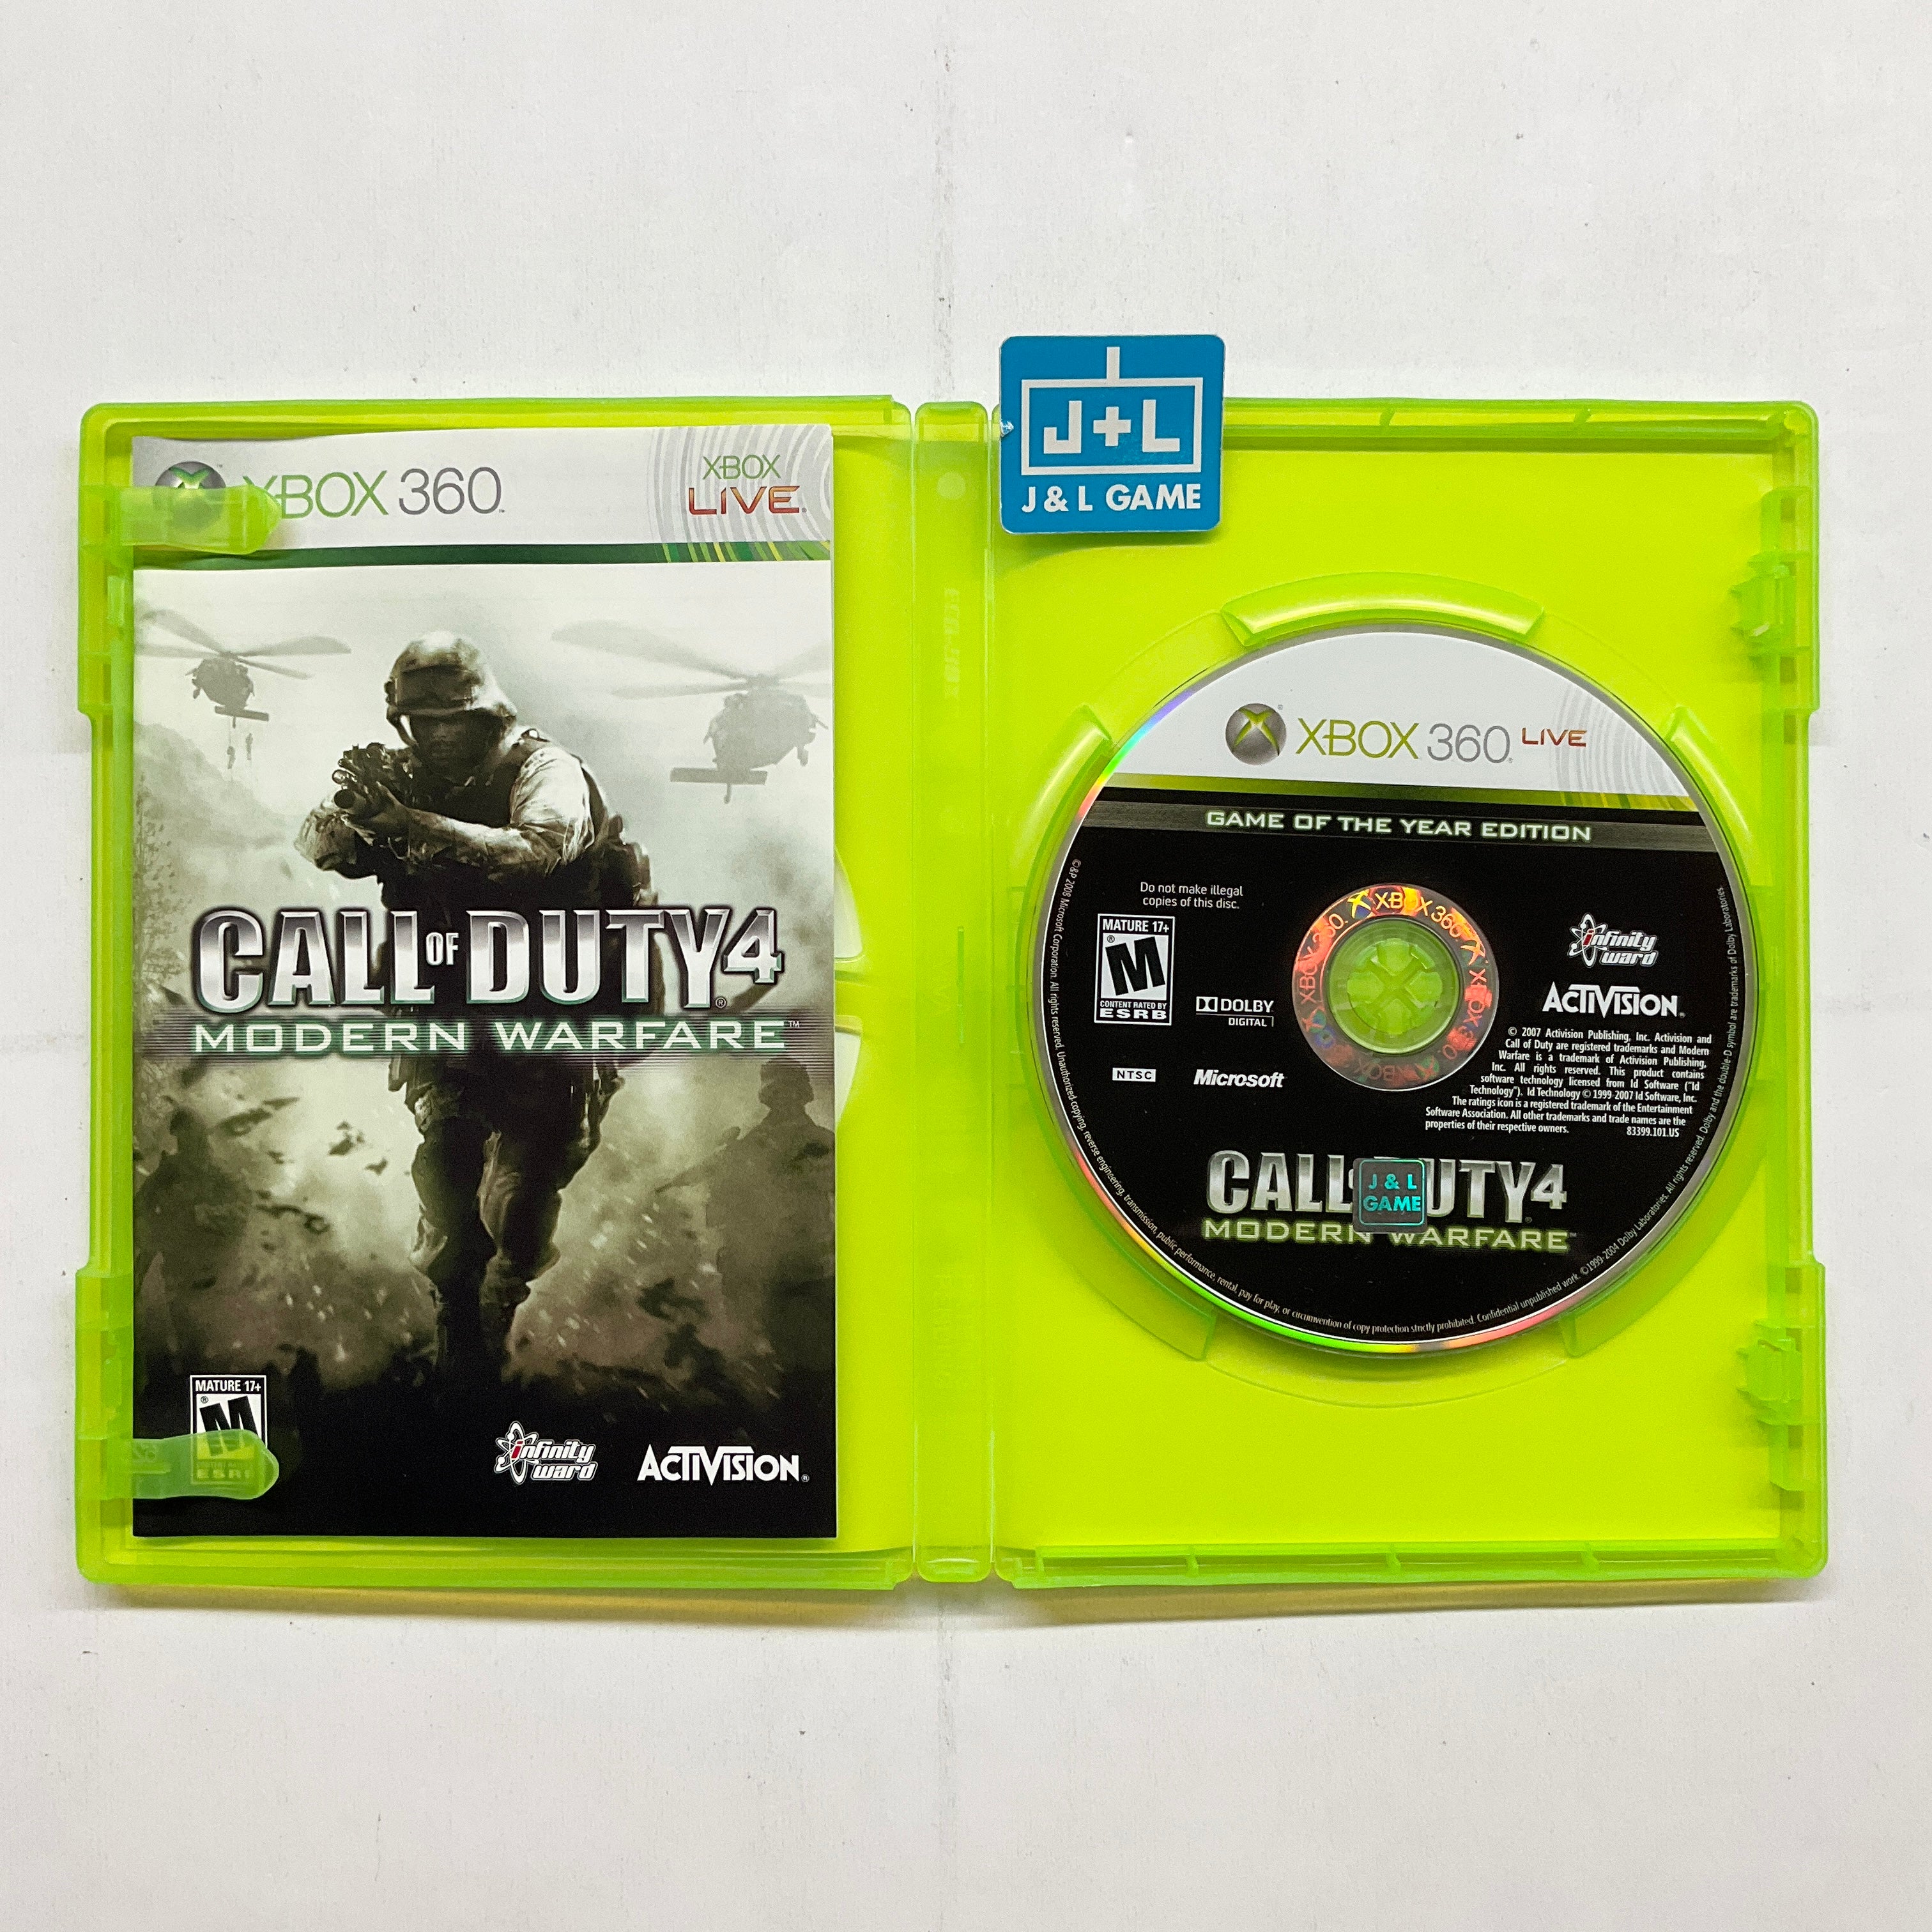 Call of Duty 4: Modern Warfare (Game of the Year Edition) - Xbox 360 [Pre-Owned] Video Games Activision   